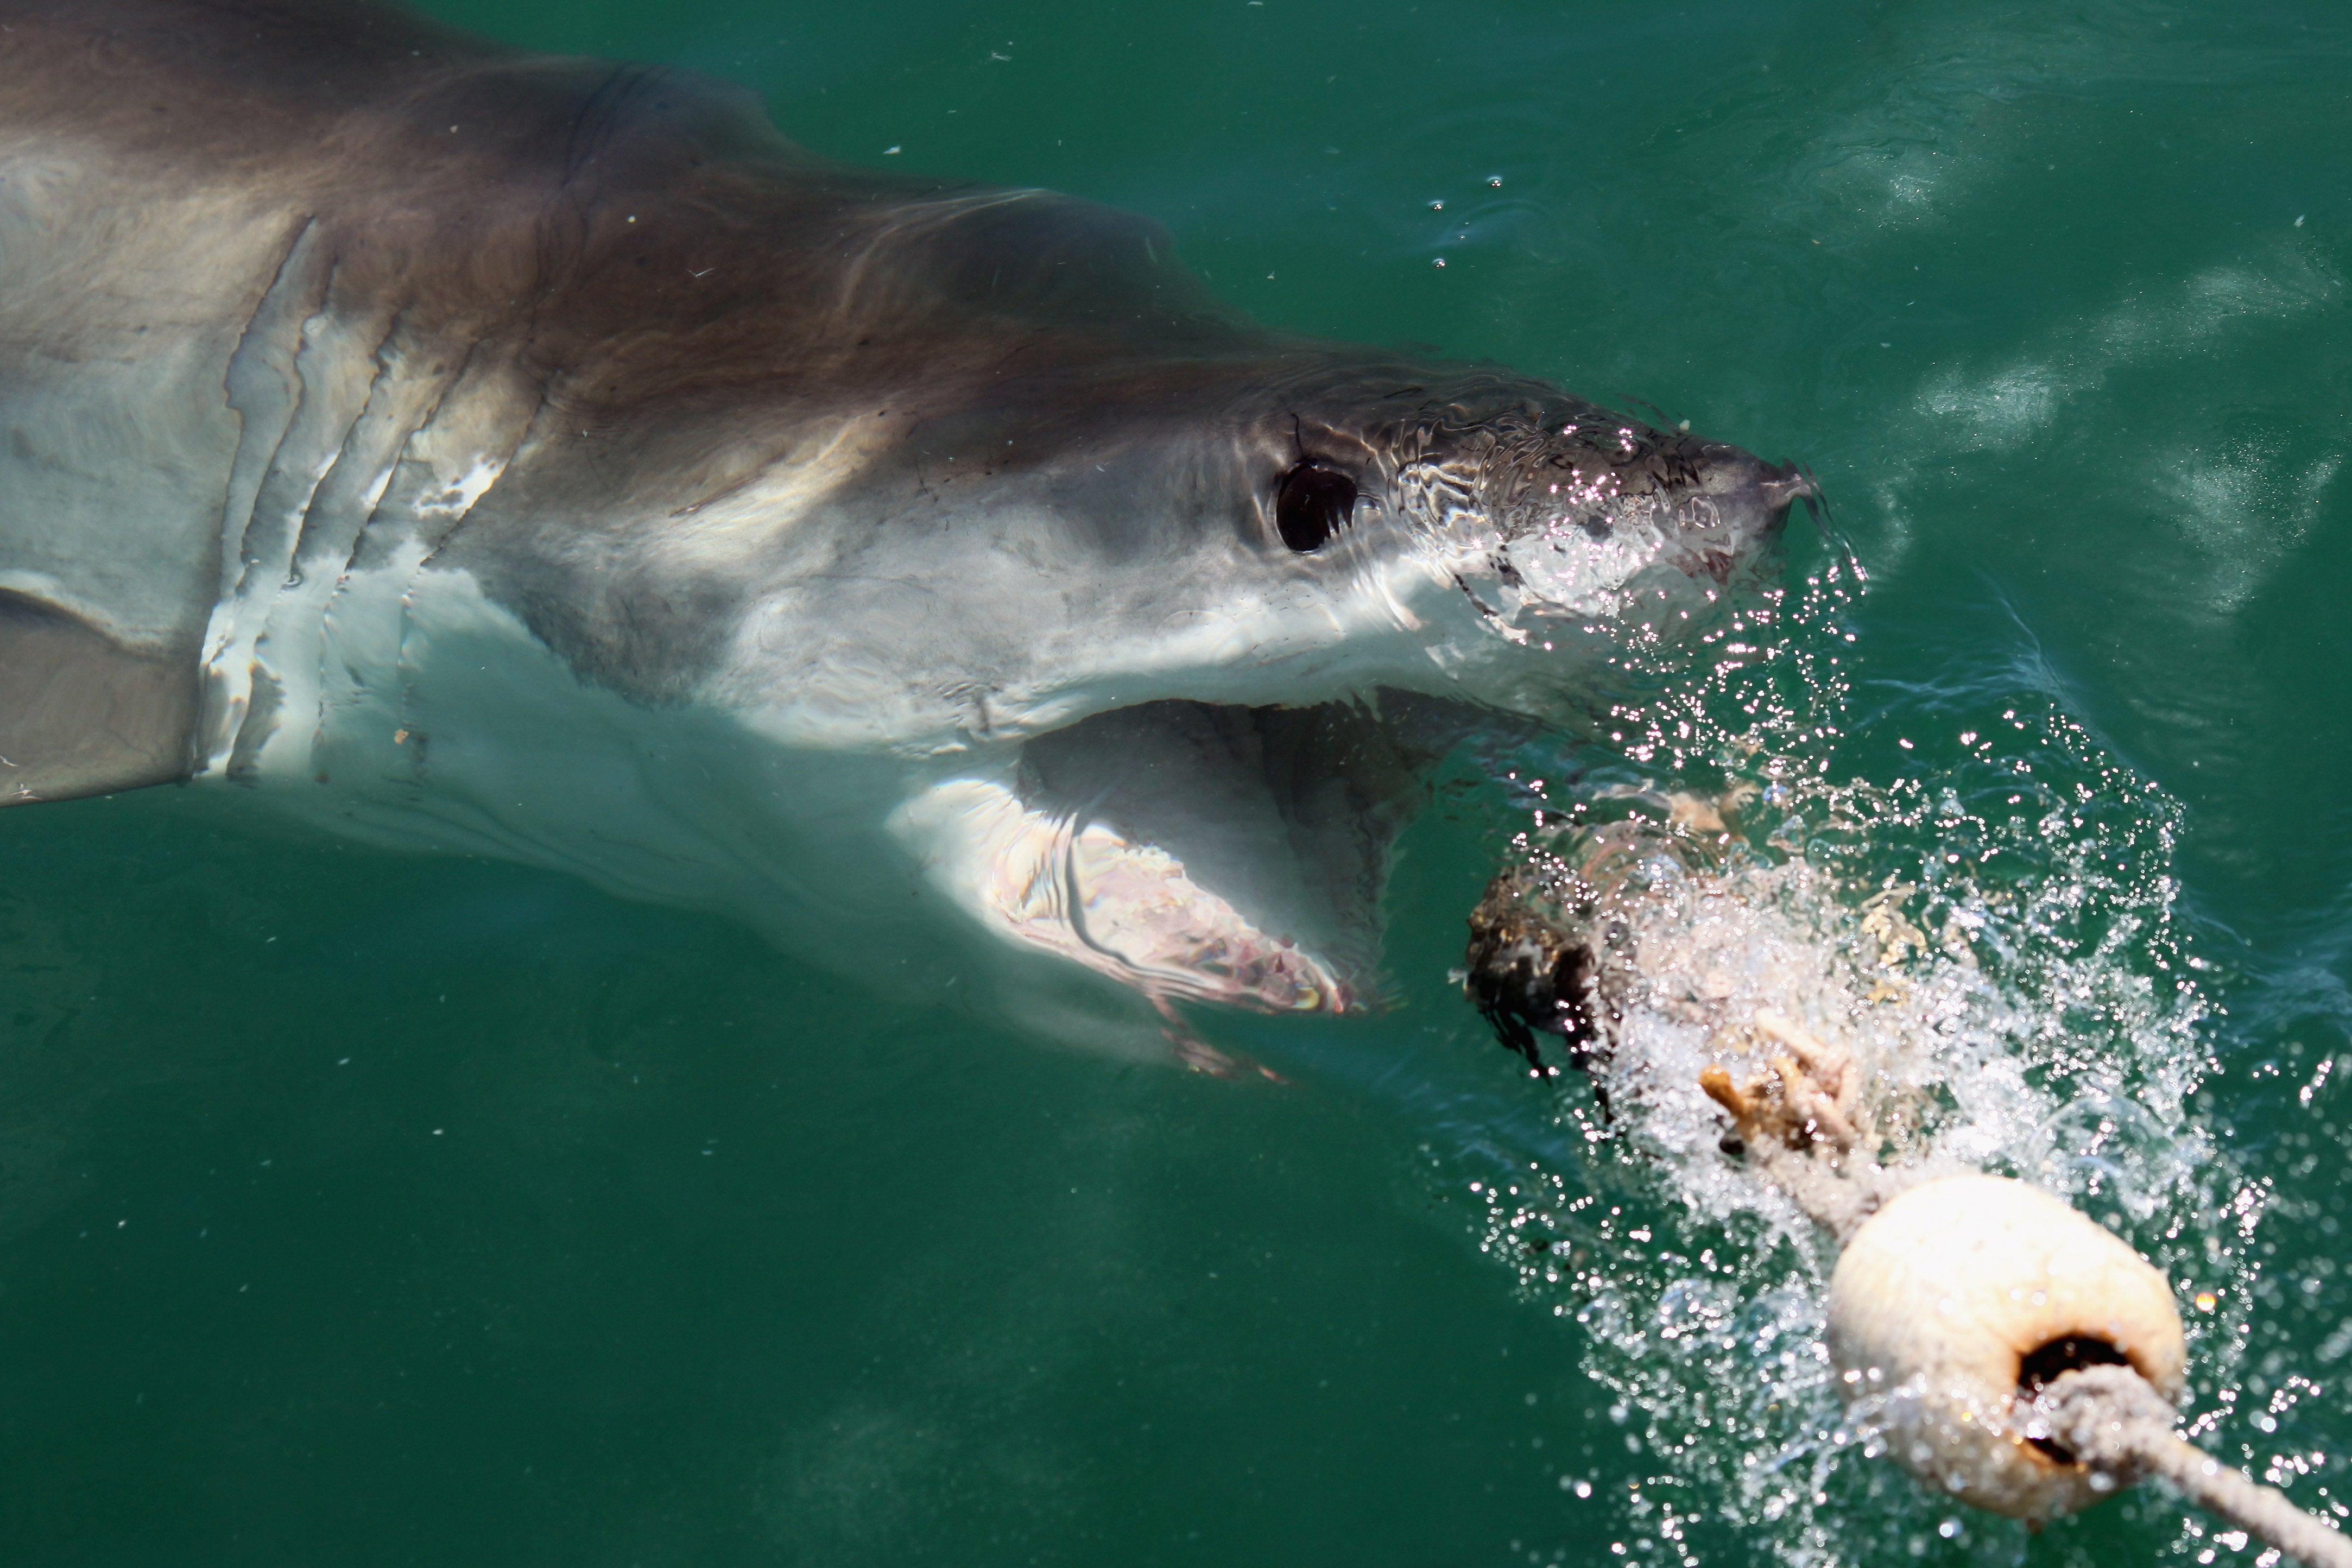 Juvenile great whites cannot significantly tell the difference between sea lions, seals and humans